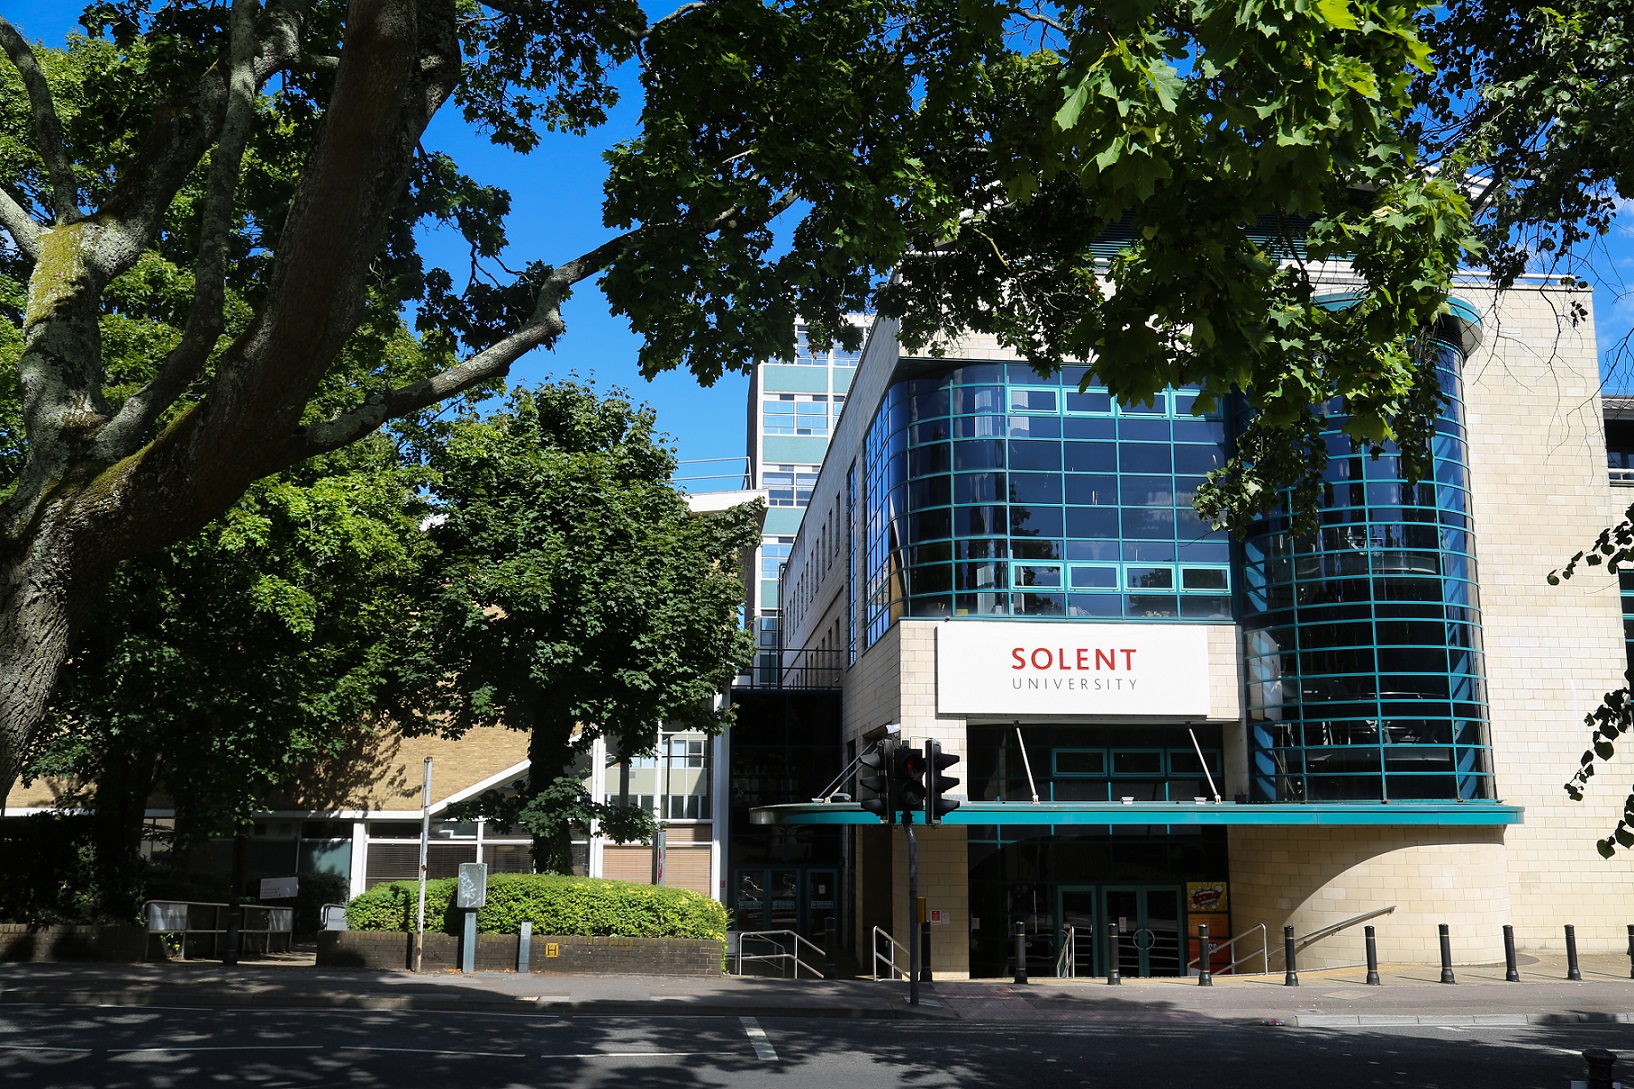 A glass and stone building with the word Solent University on. Sits in amongst trees.